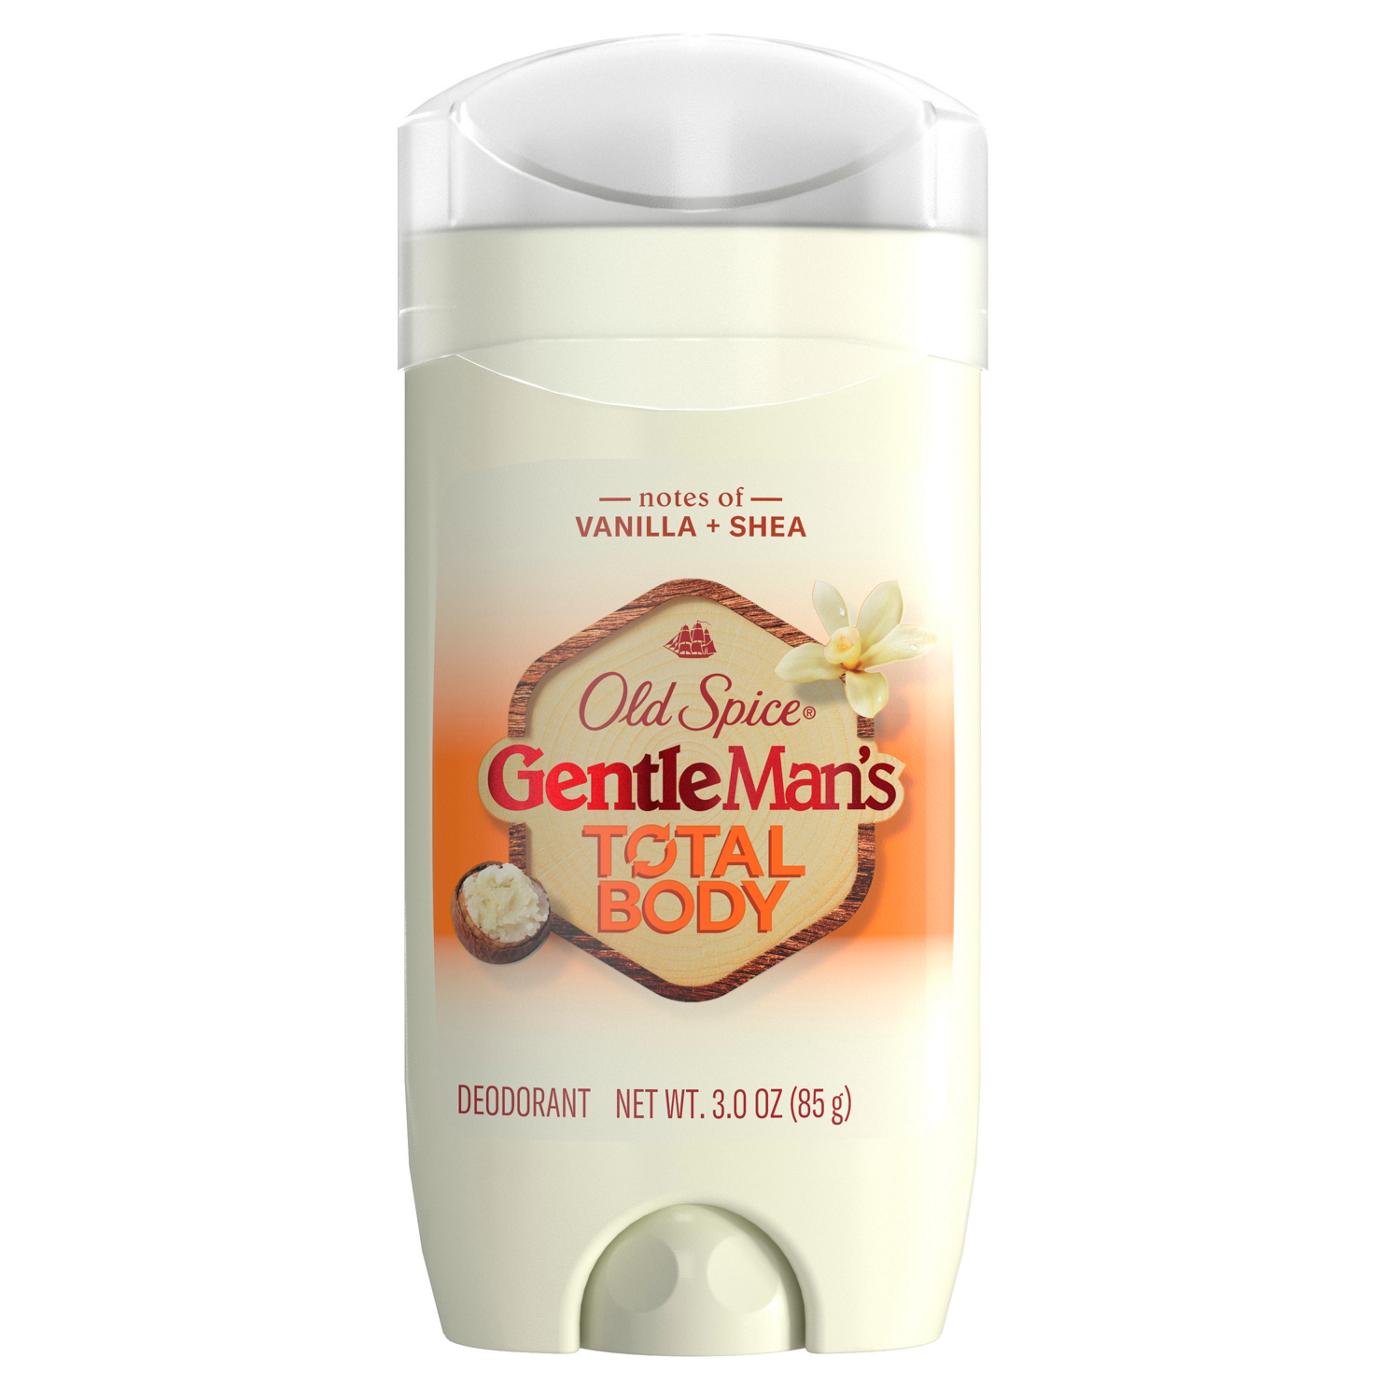 Old Spice Gentle Man's Total Body Deodorant - Vanilla + Shea Butter; image 1 of 2